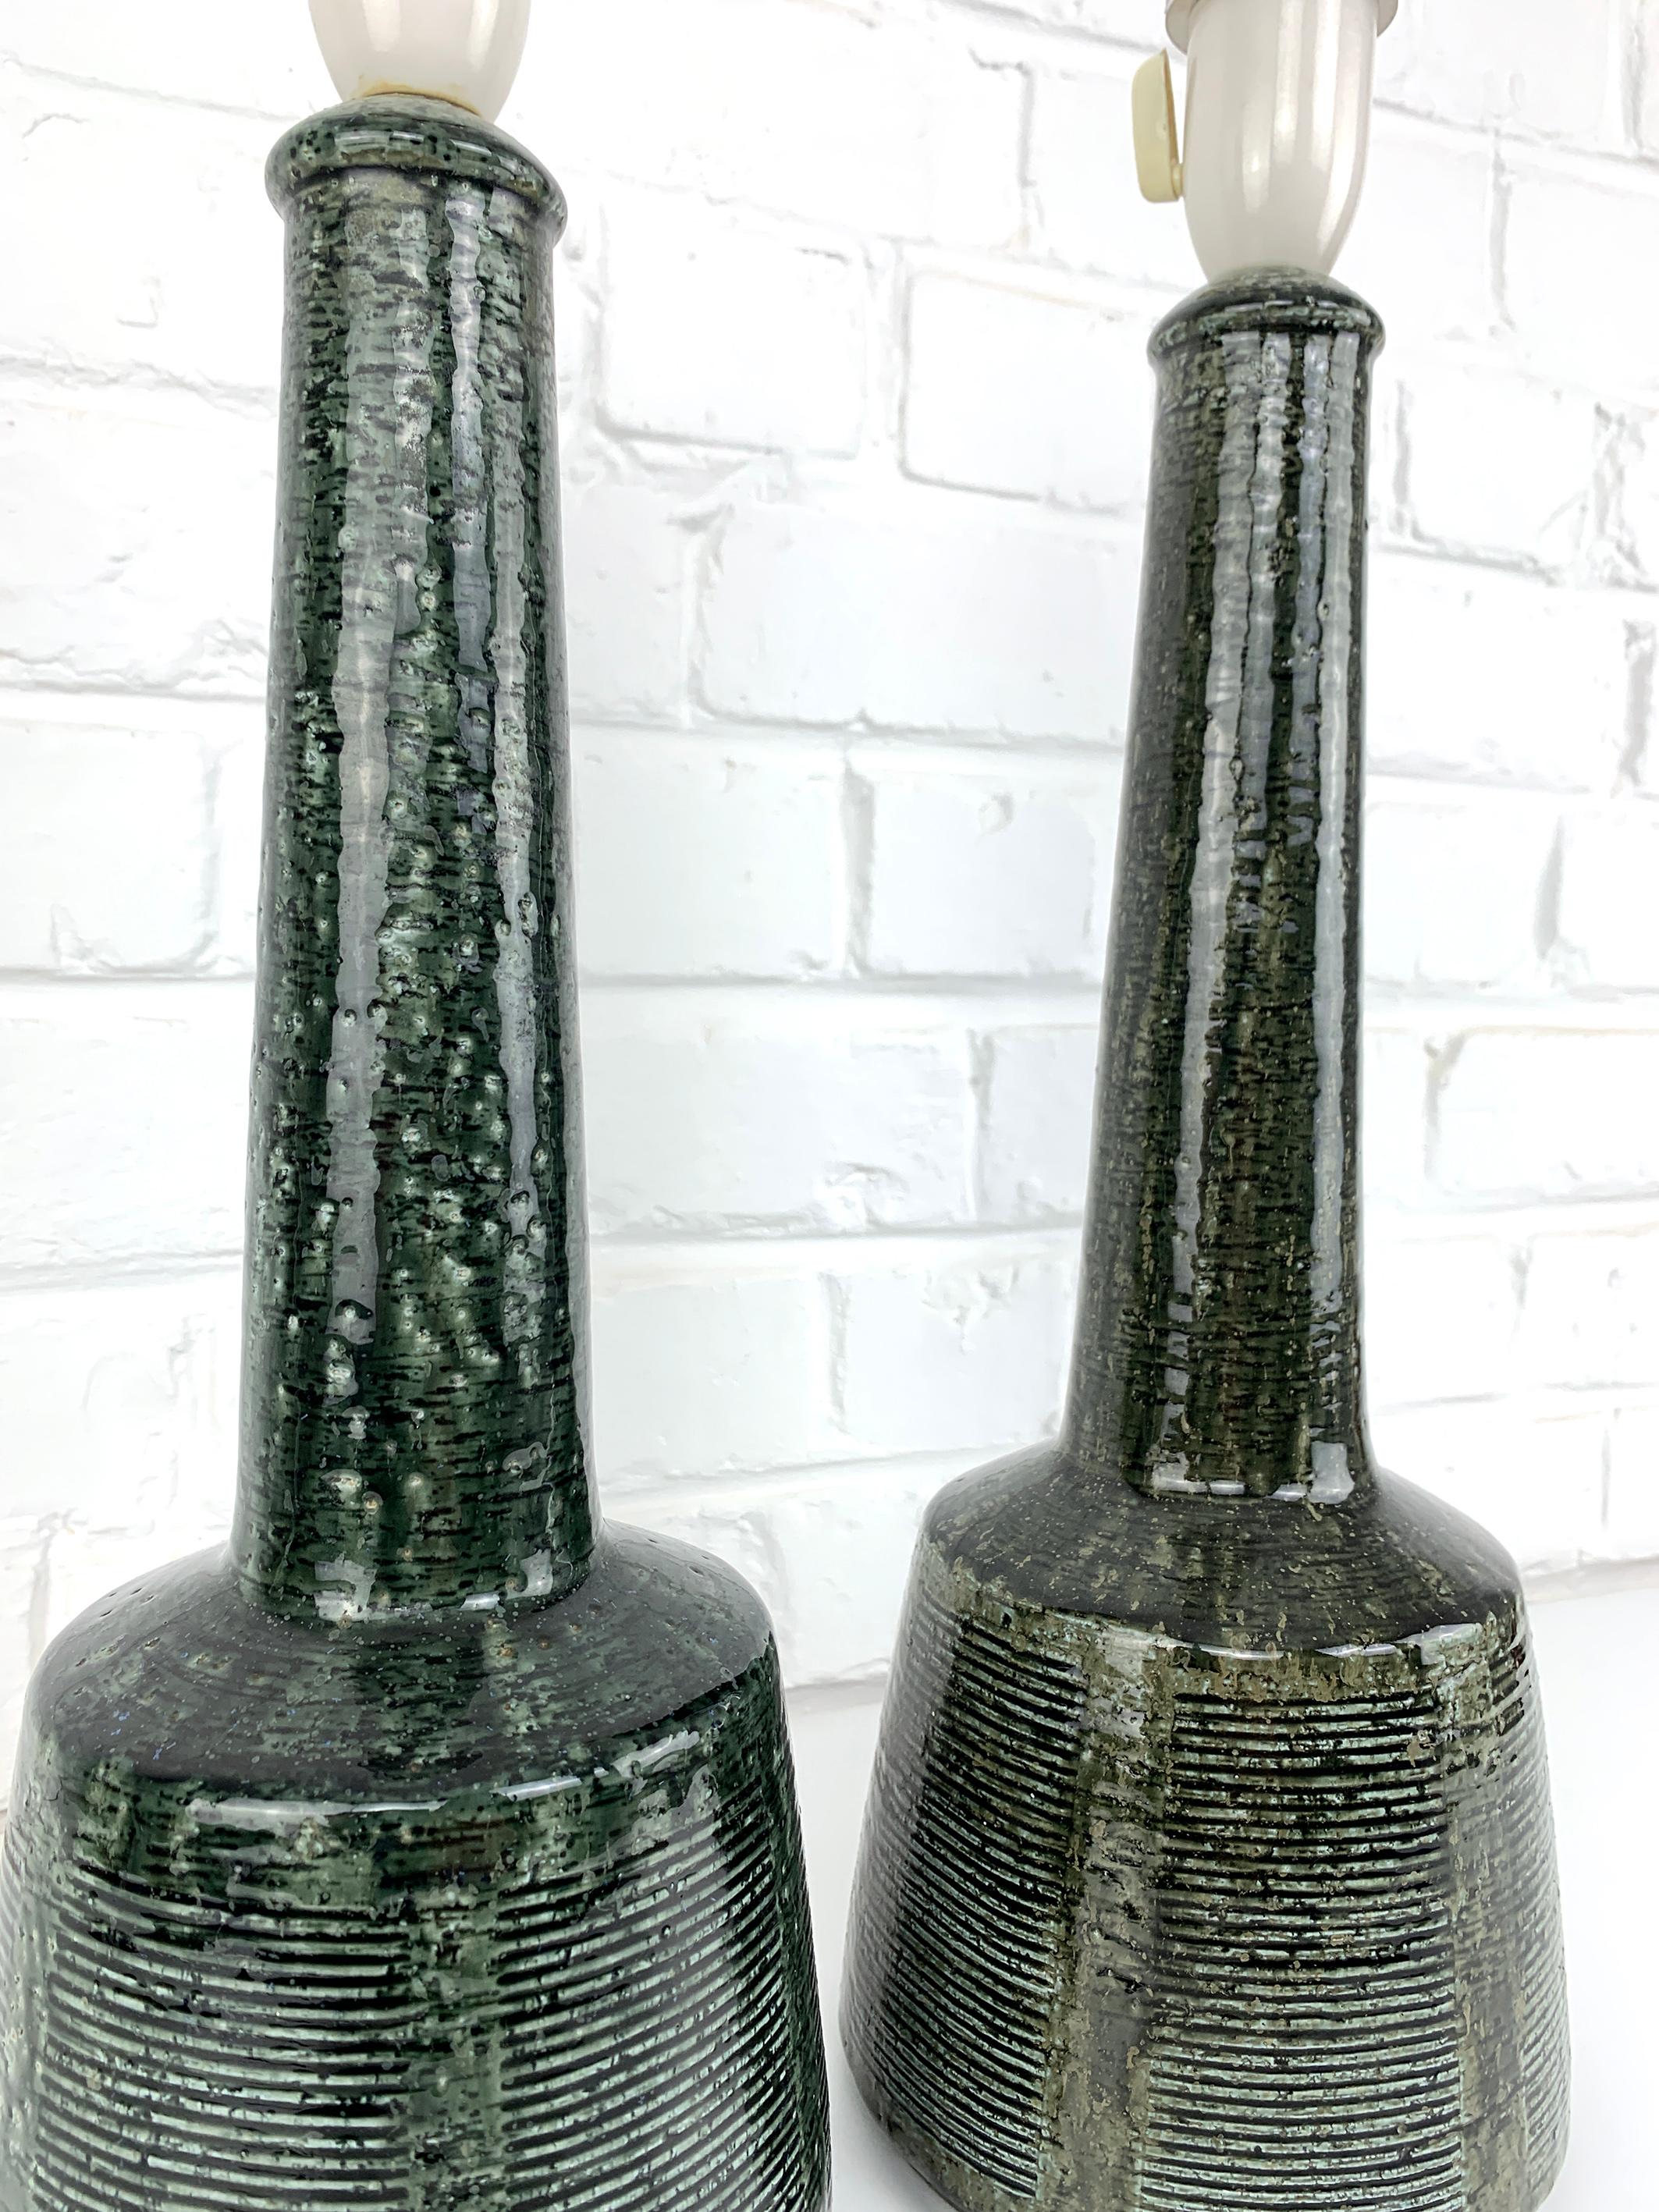 Pair of Tall Ceramic table lamps by Palshus, design by Esben Klint for Le Klint 8